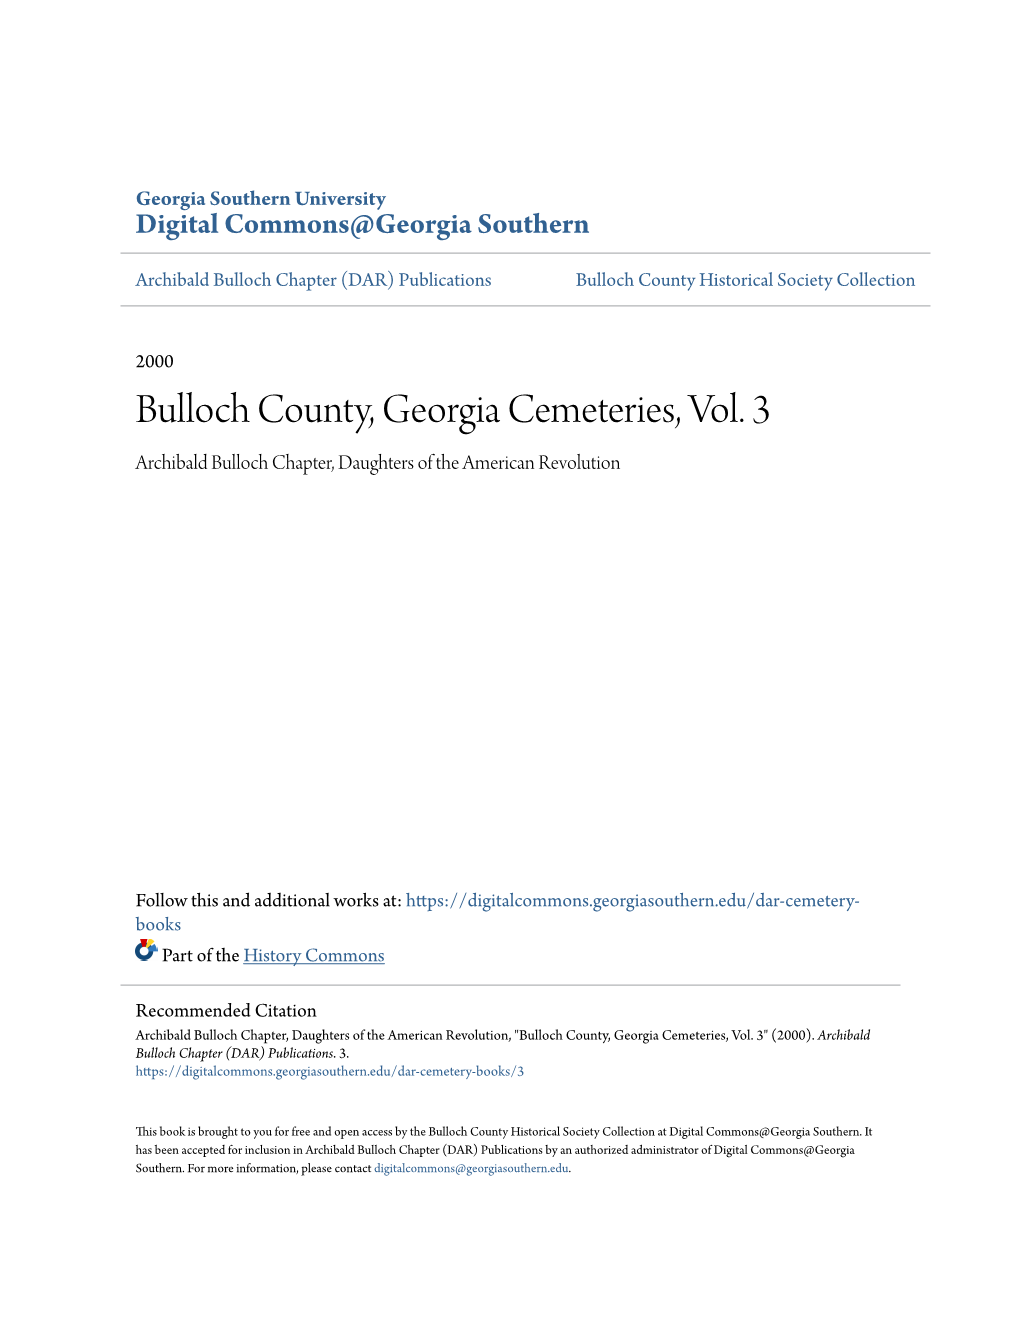 Bulloch County, Georgia Cemeteries, Vol. 3 Archibald Bulloch Chapter, Daughters of the American Revolution